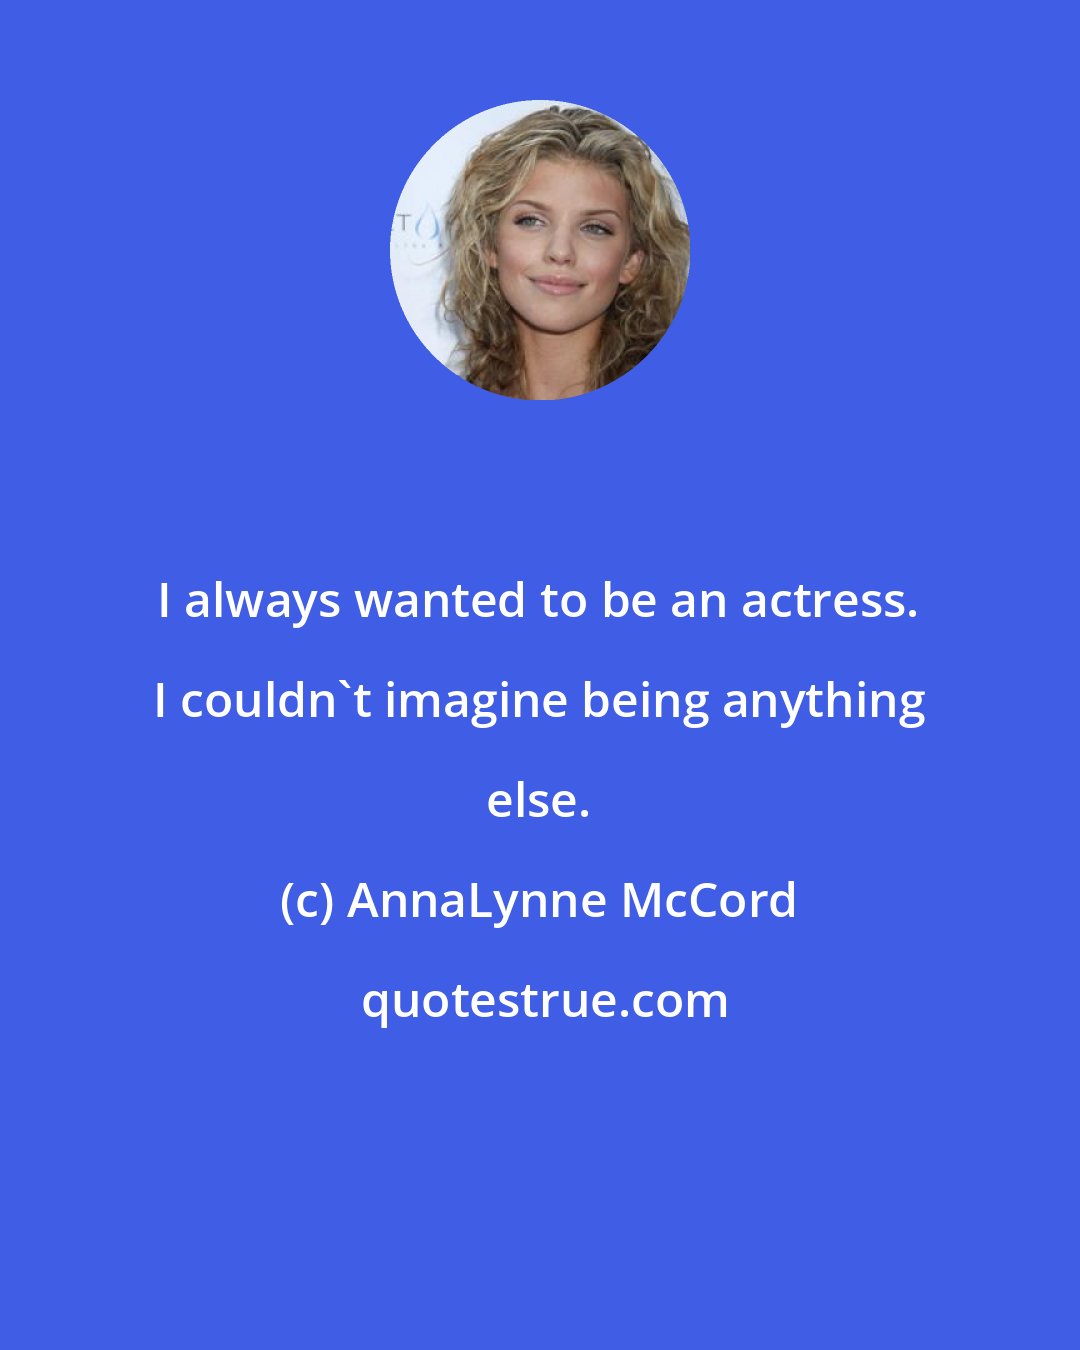 AnnaLynne McCord: I always wanted to be an actress. I couldn't imagine being anything else.